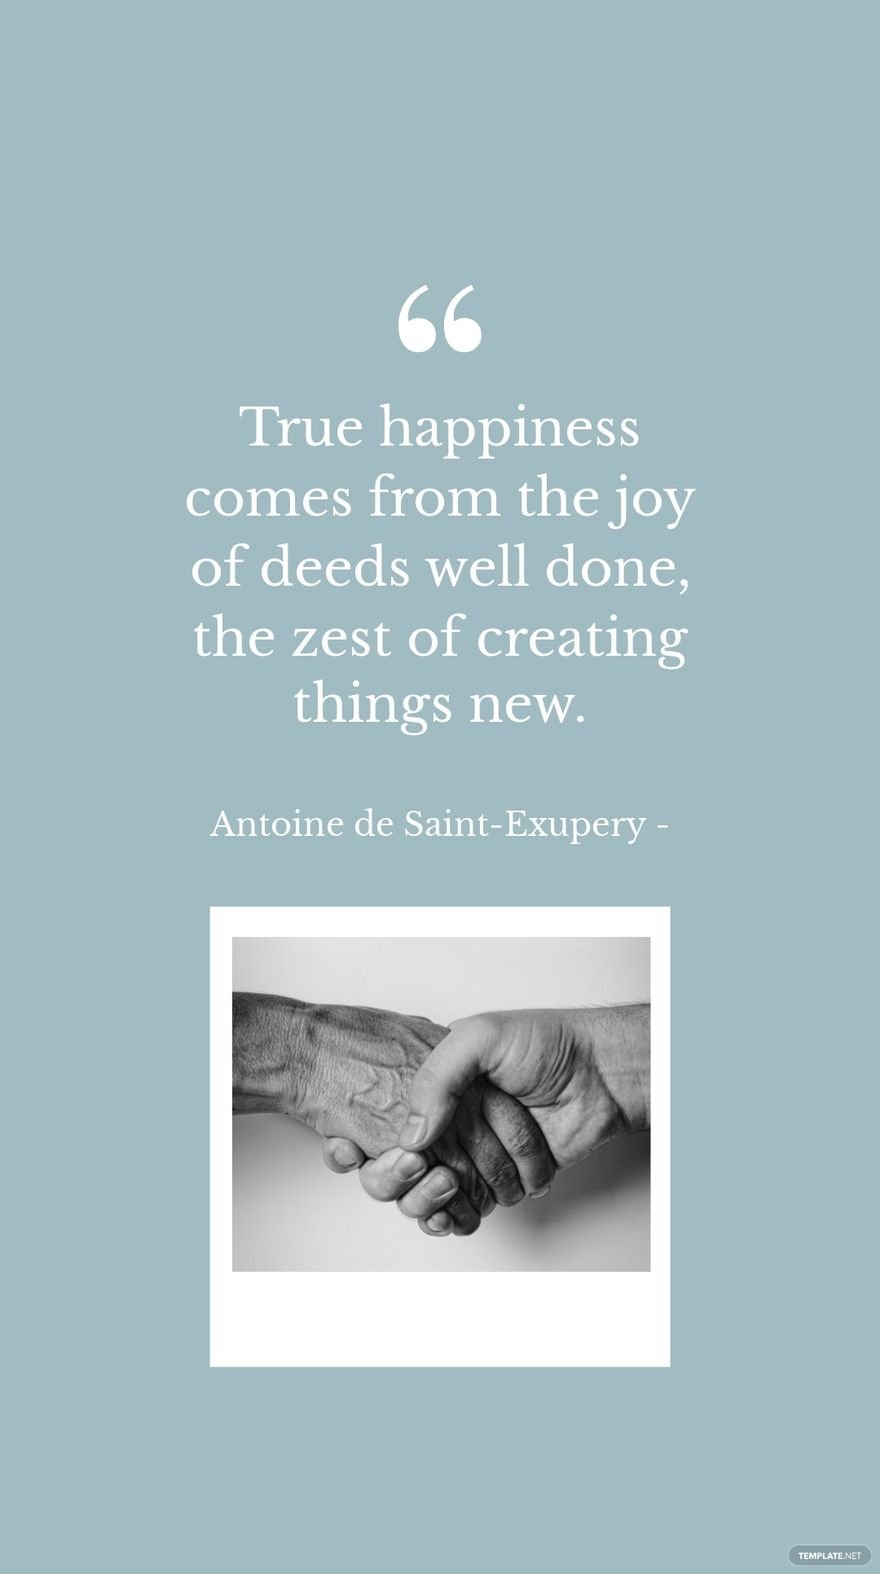 Antoine de Saint-Exupery - True happiness comes from the joy of deeds well done, the zest of creating things new.